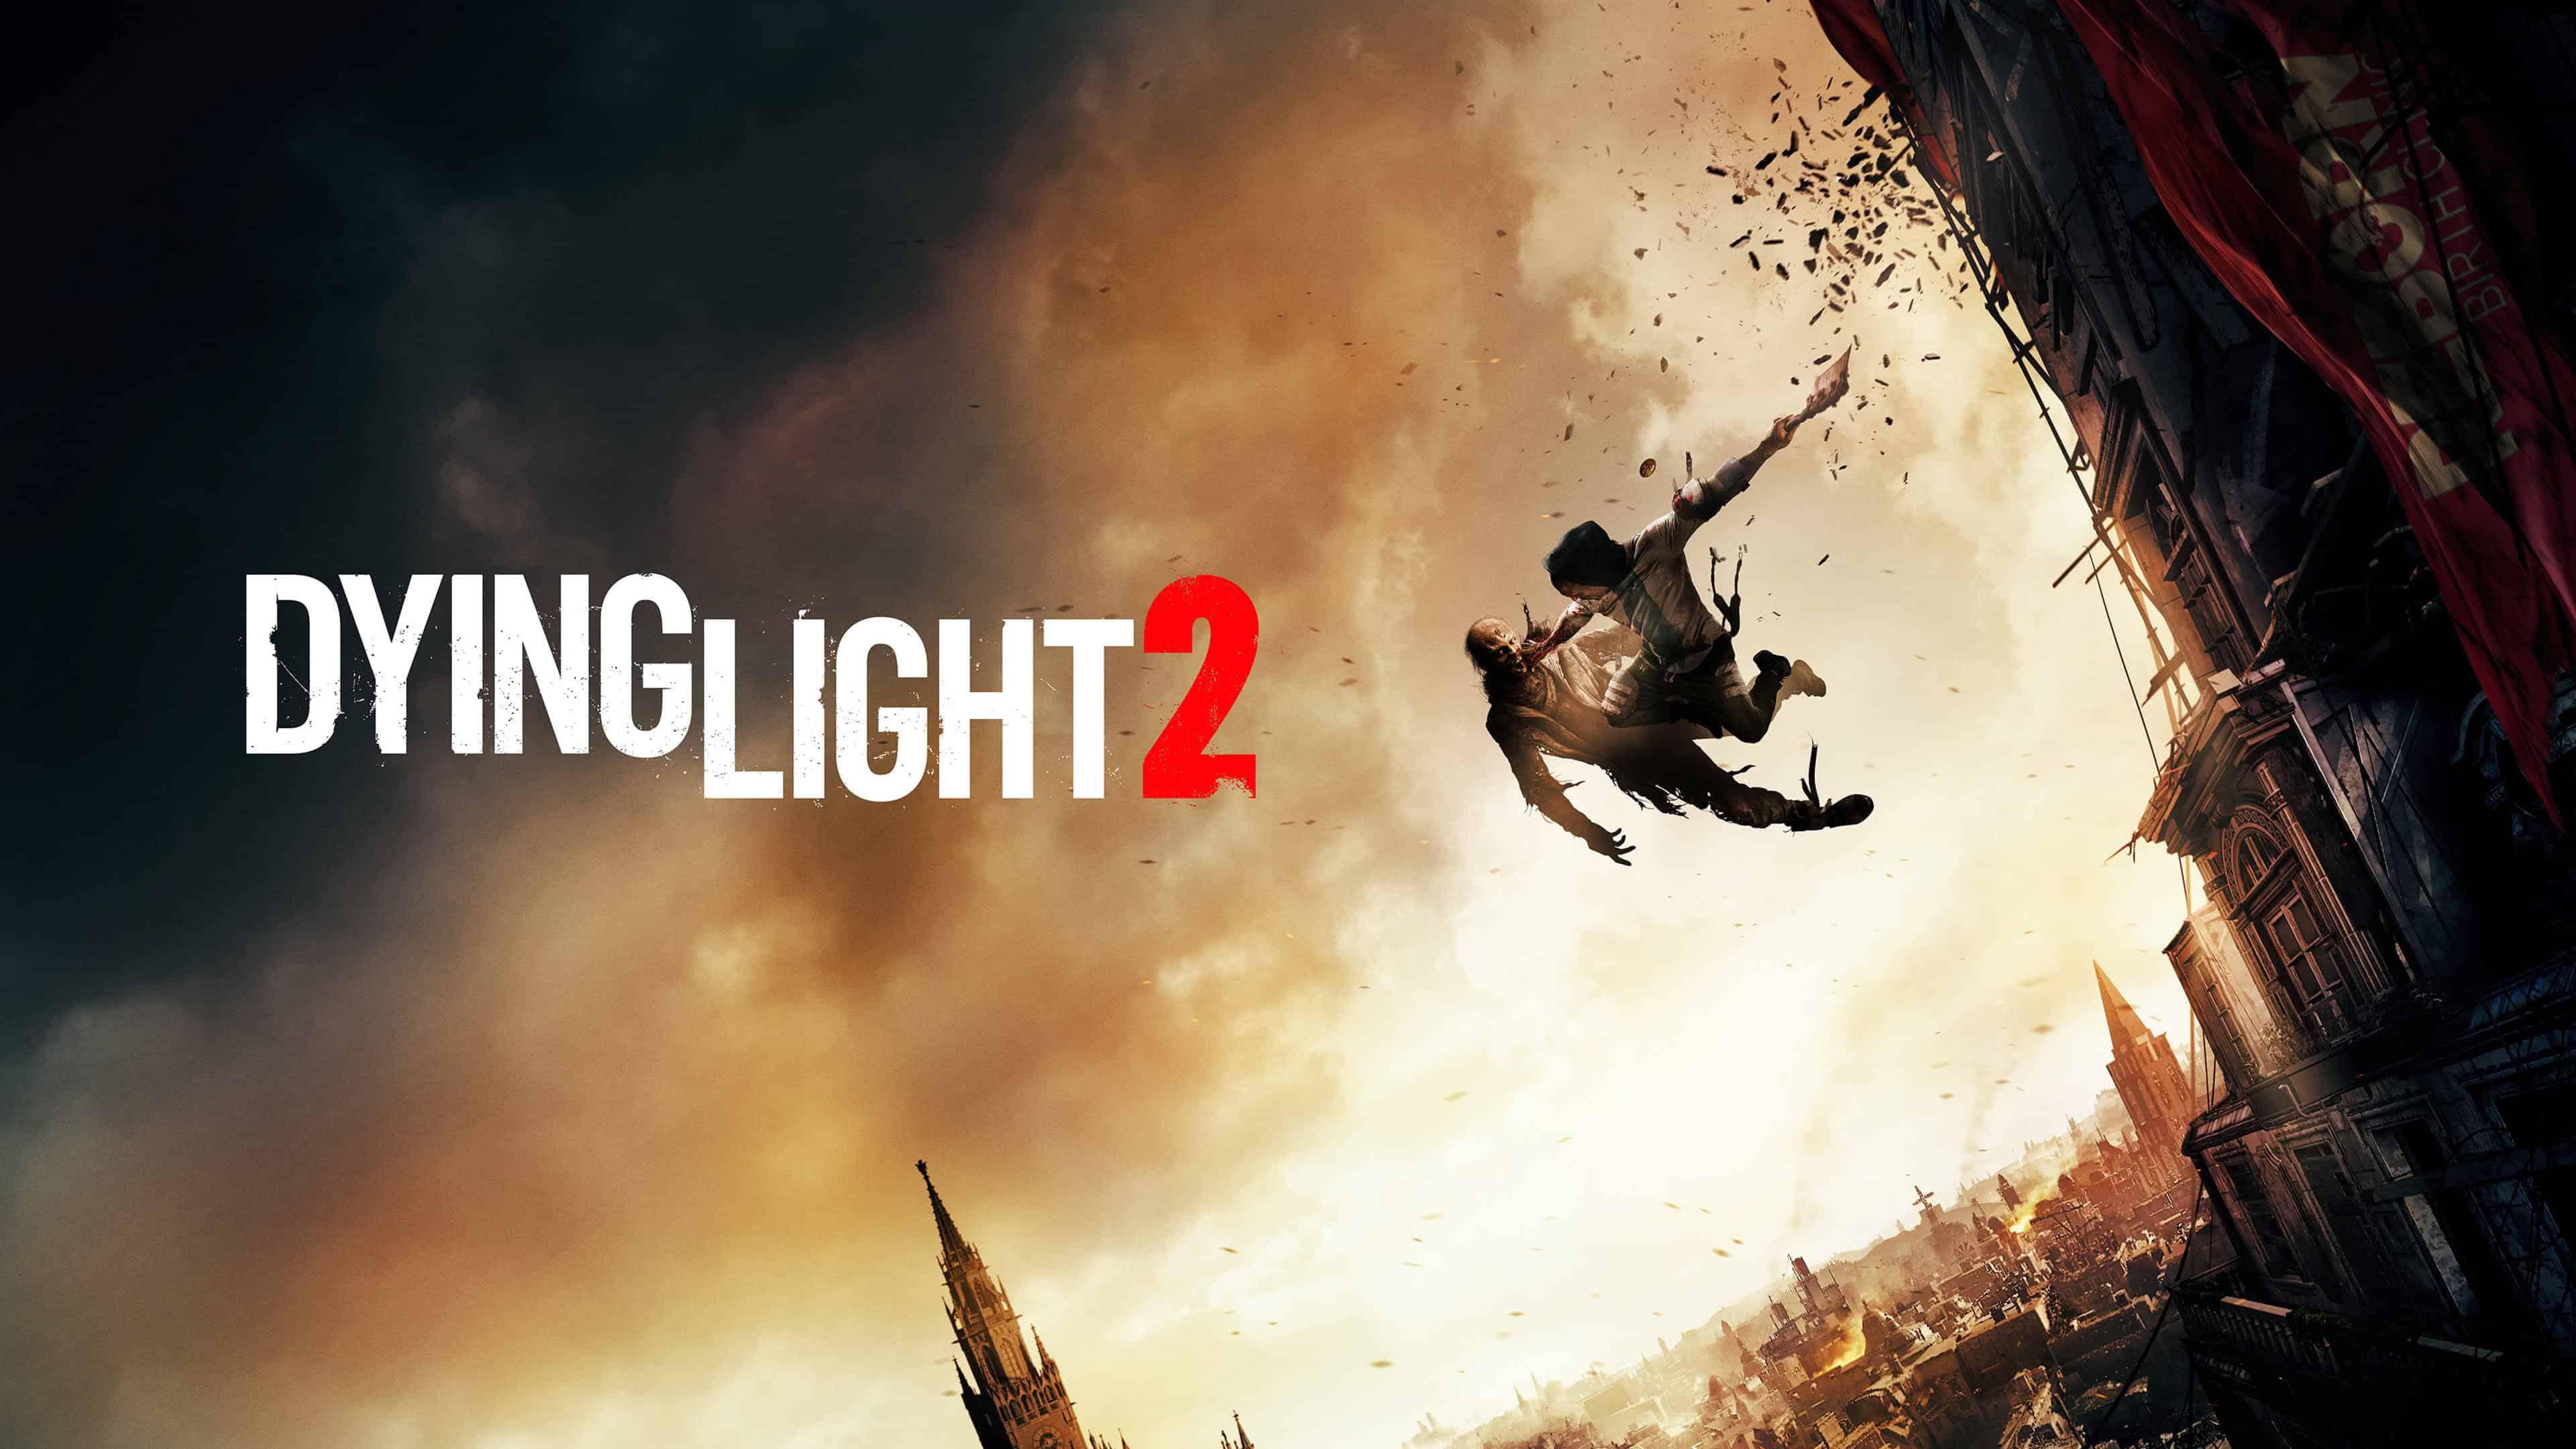 Dying Light 2 Wallpaper Free Dying Light 2 Background